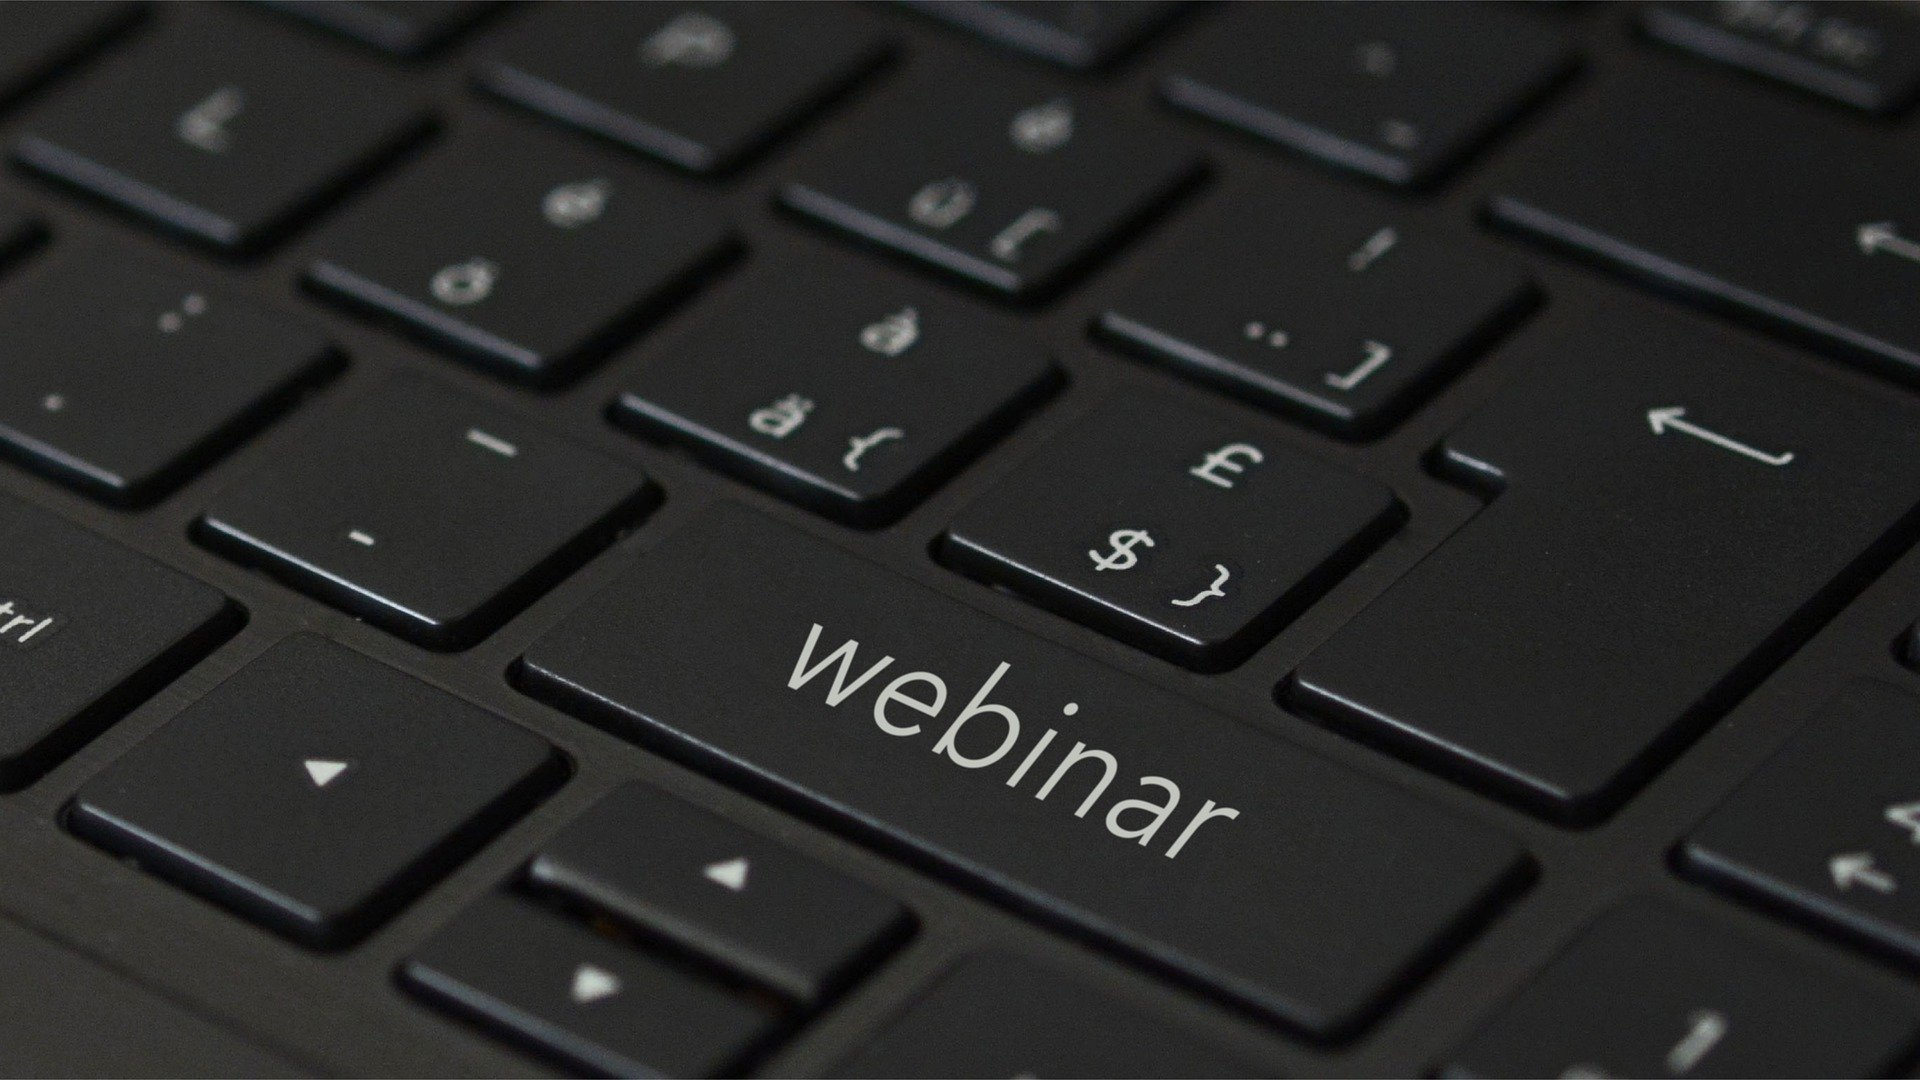 Close-up image of a key board. The text on the shift button has been replaced with Webinar